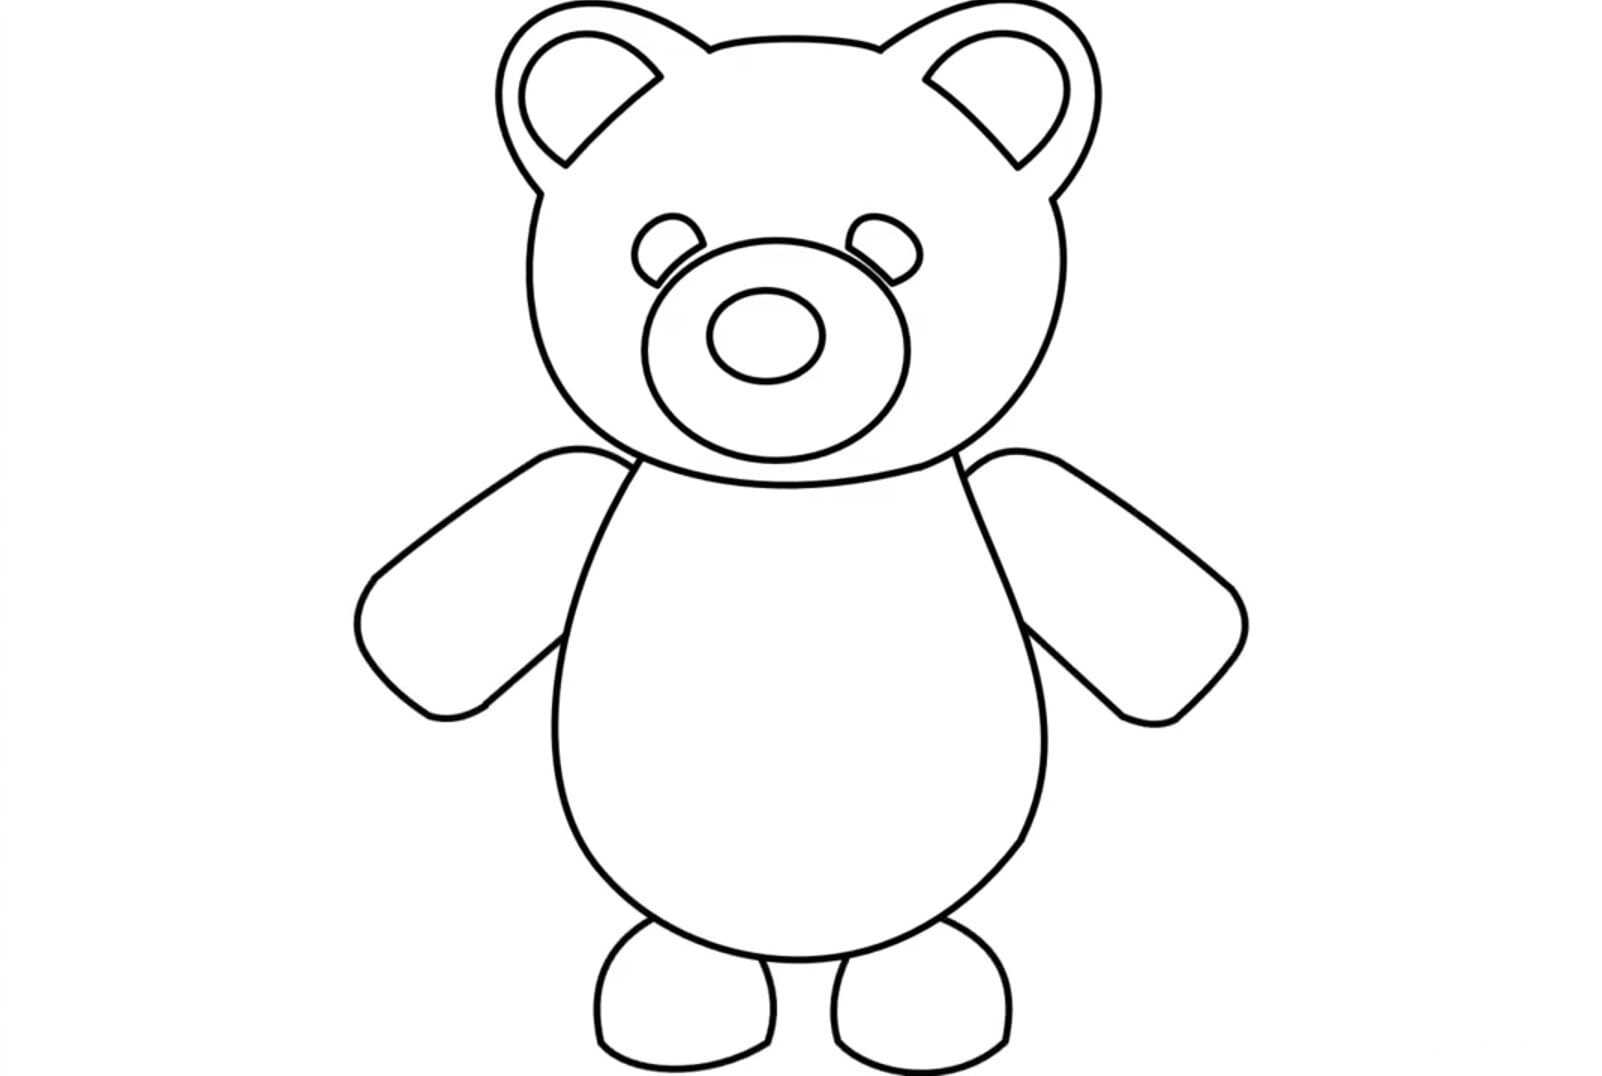 The Polar Bear From Adopt Me Could Be Obtained From The Christmas Egg Coloring Pages Adopt Me Coloring Pages Coloring Pages For Kids And Adults - polar bear head roblox